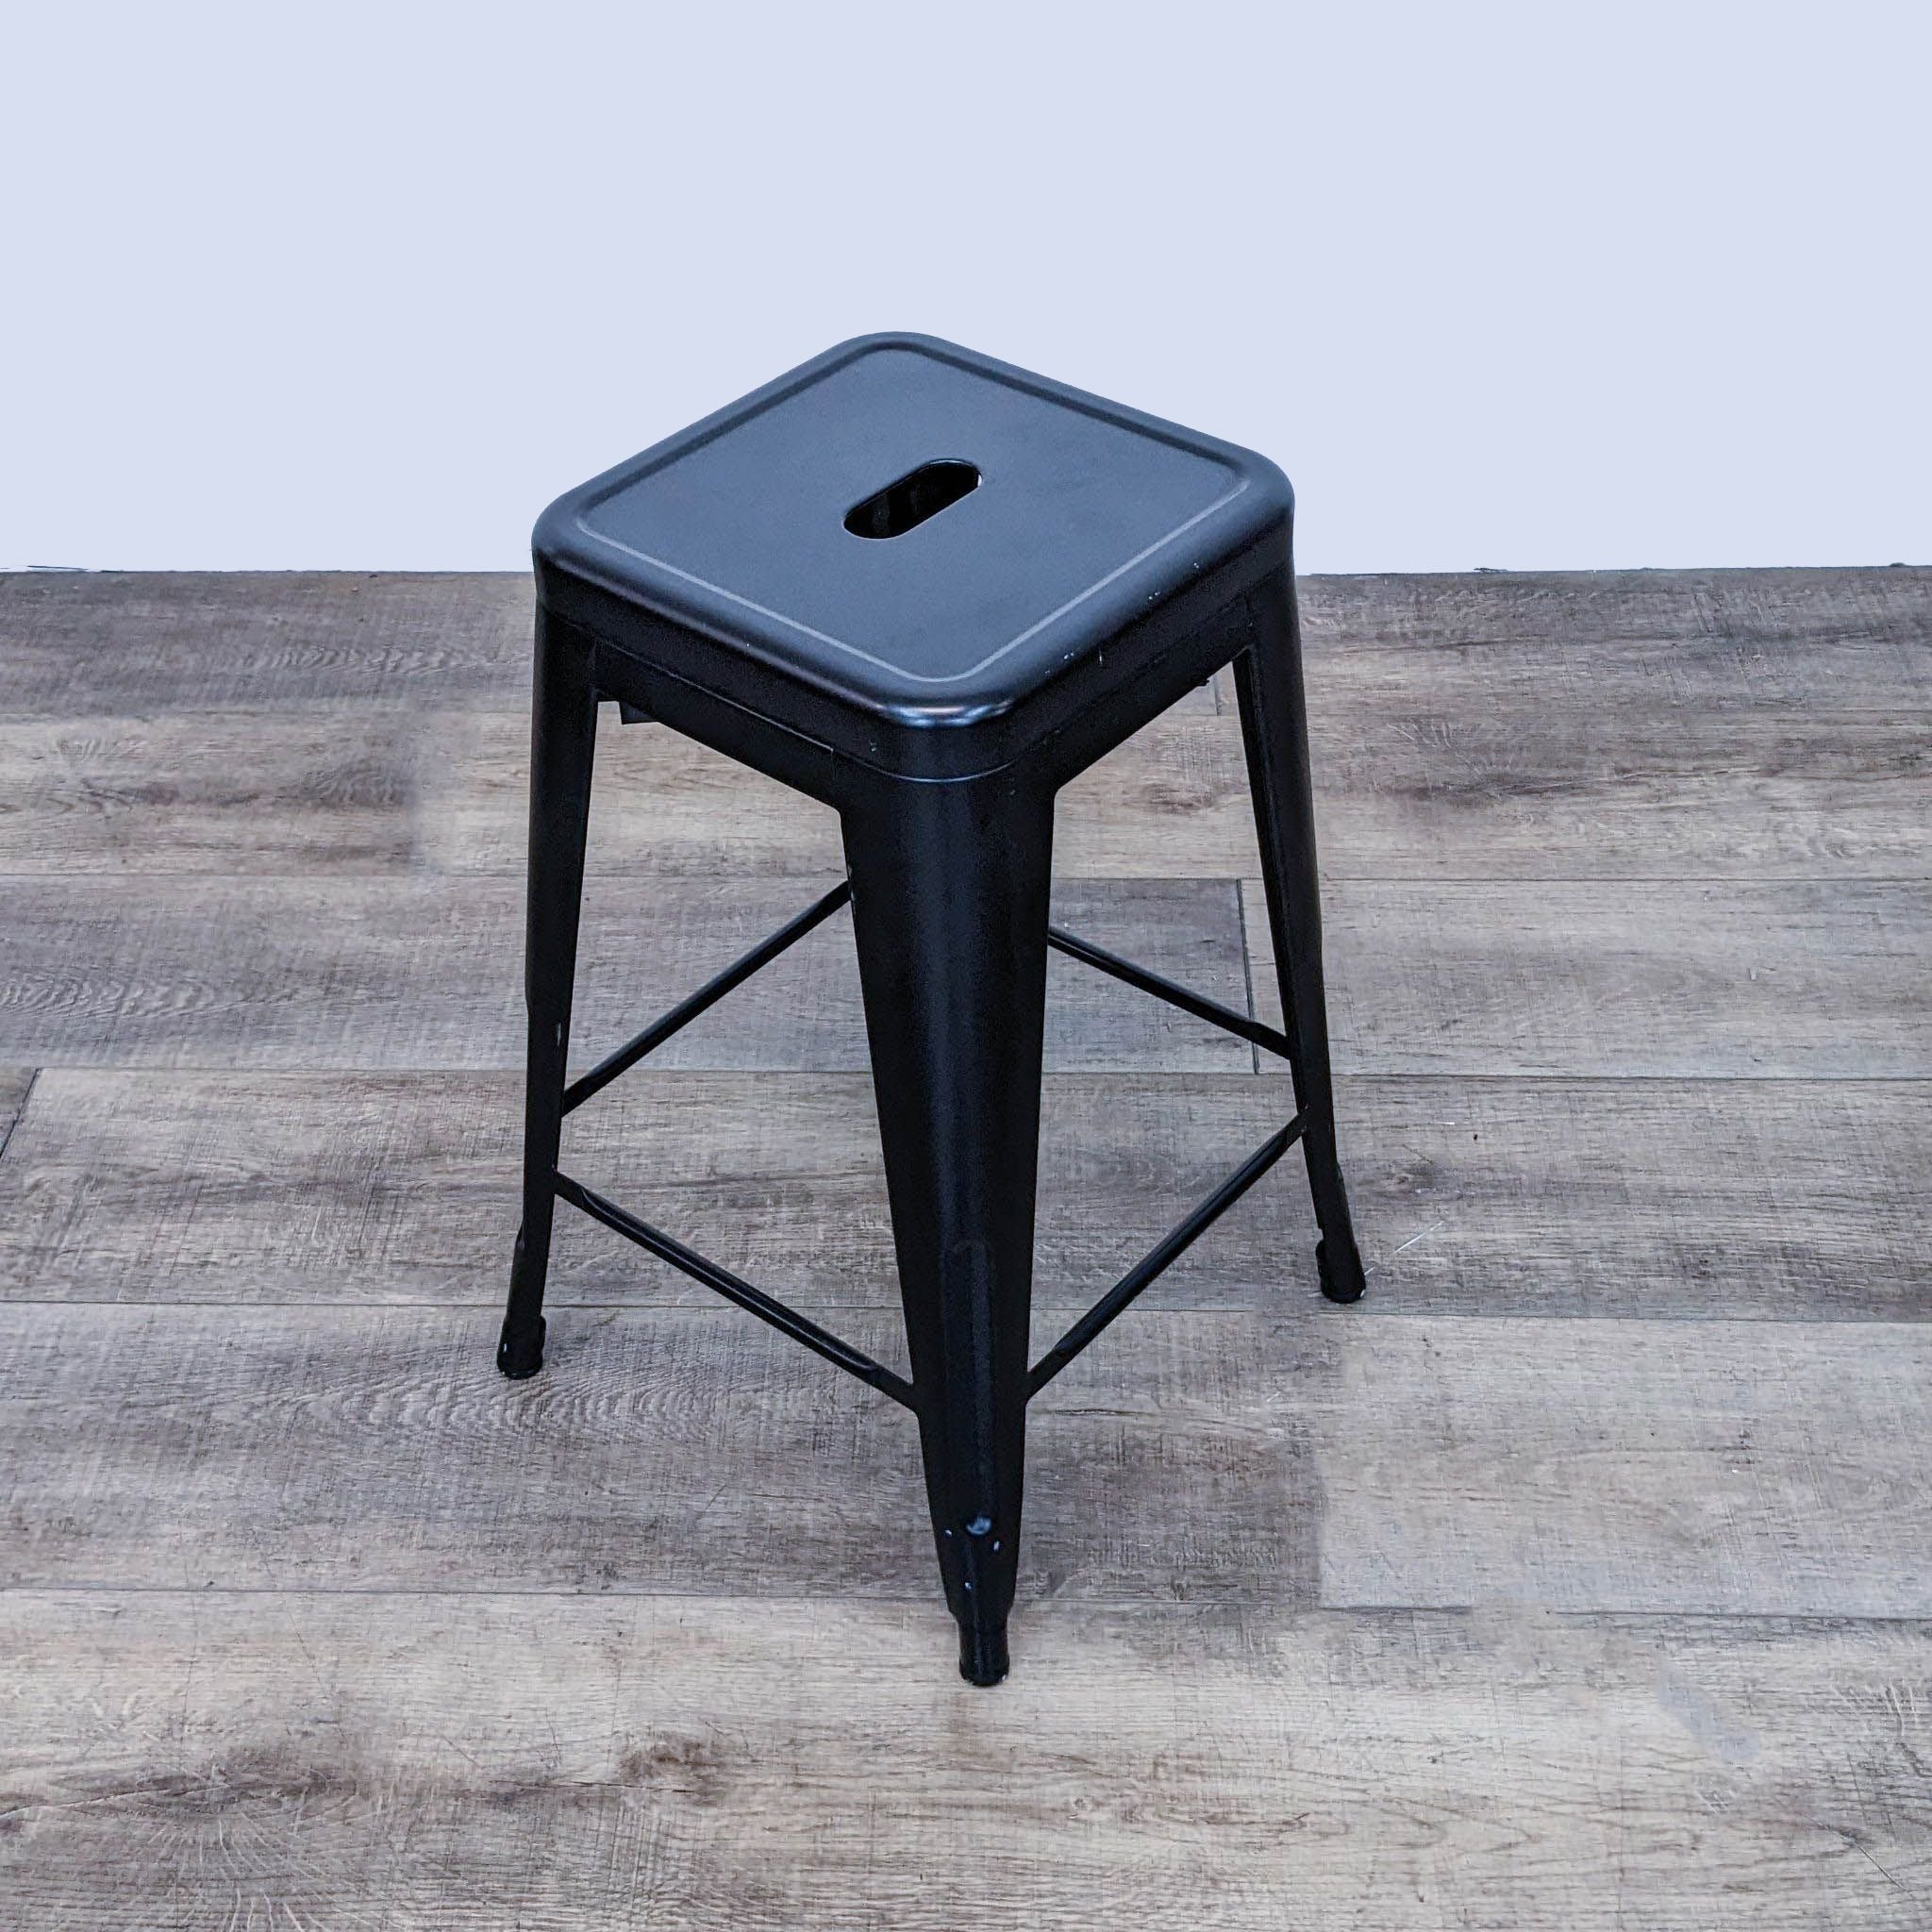 Reperch black metal counter stool with seat hole, angled on wooden floor.